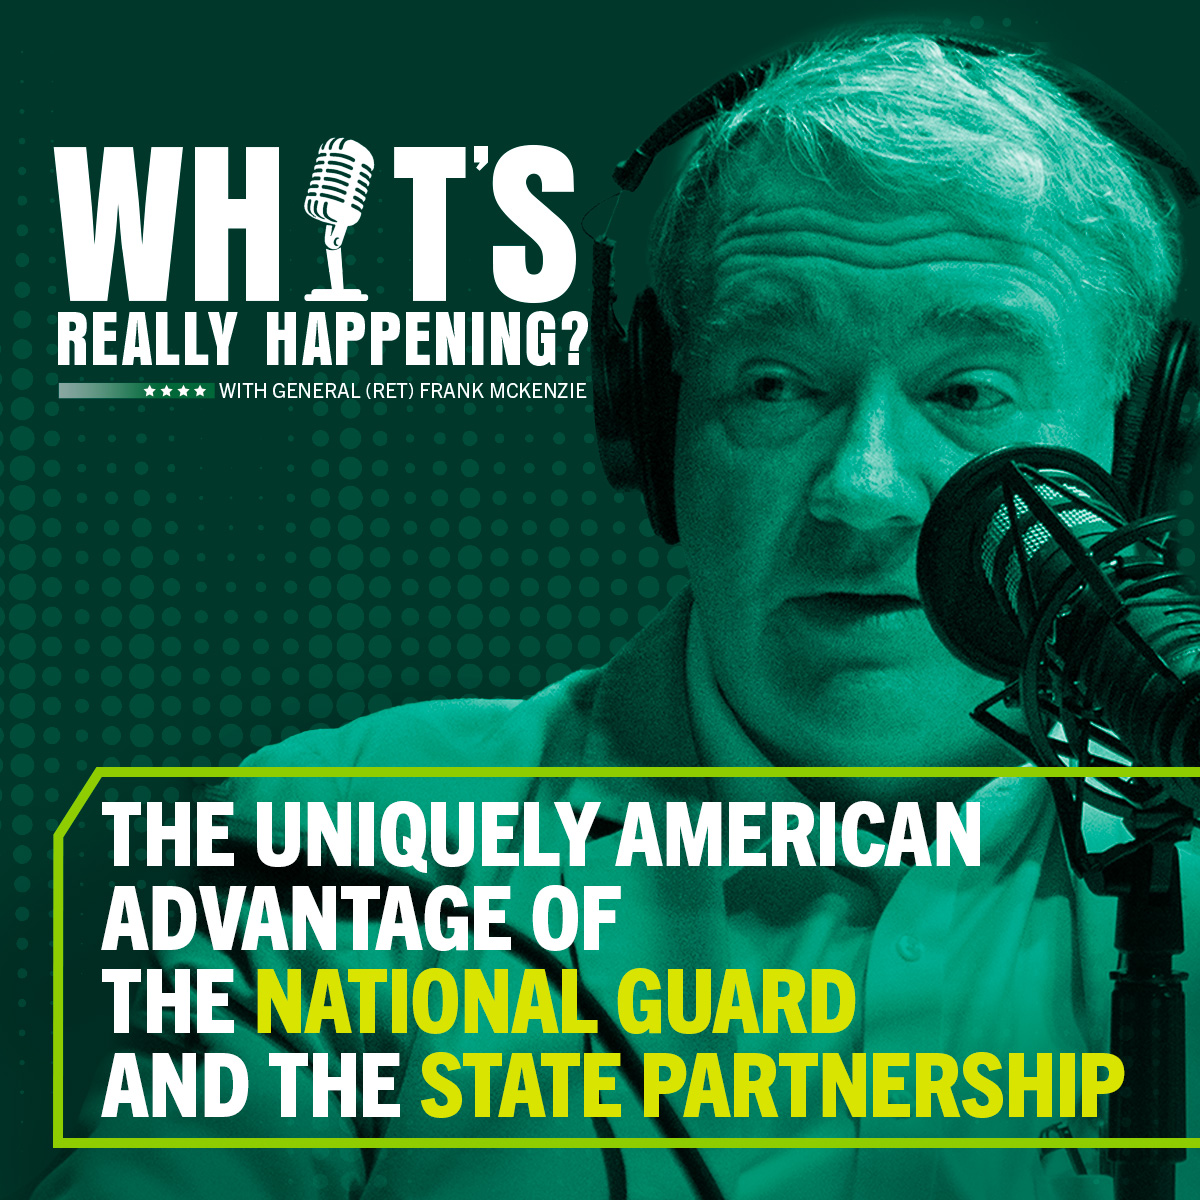 The latest What's Really Happening is out now! General (Ret) Frank McKenzie unpacks the advantages of the National Guard and the State Partnership Program.

Watch Here:
youtu.be/qOl2YJtdQpc?si…

#NationalGuard #StatePartnershipProgram #HomelandSecurity #NationalSecurity